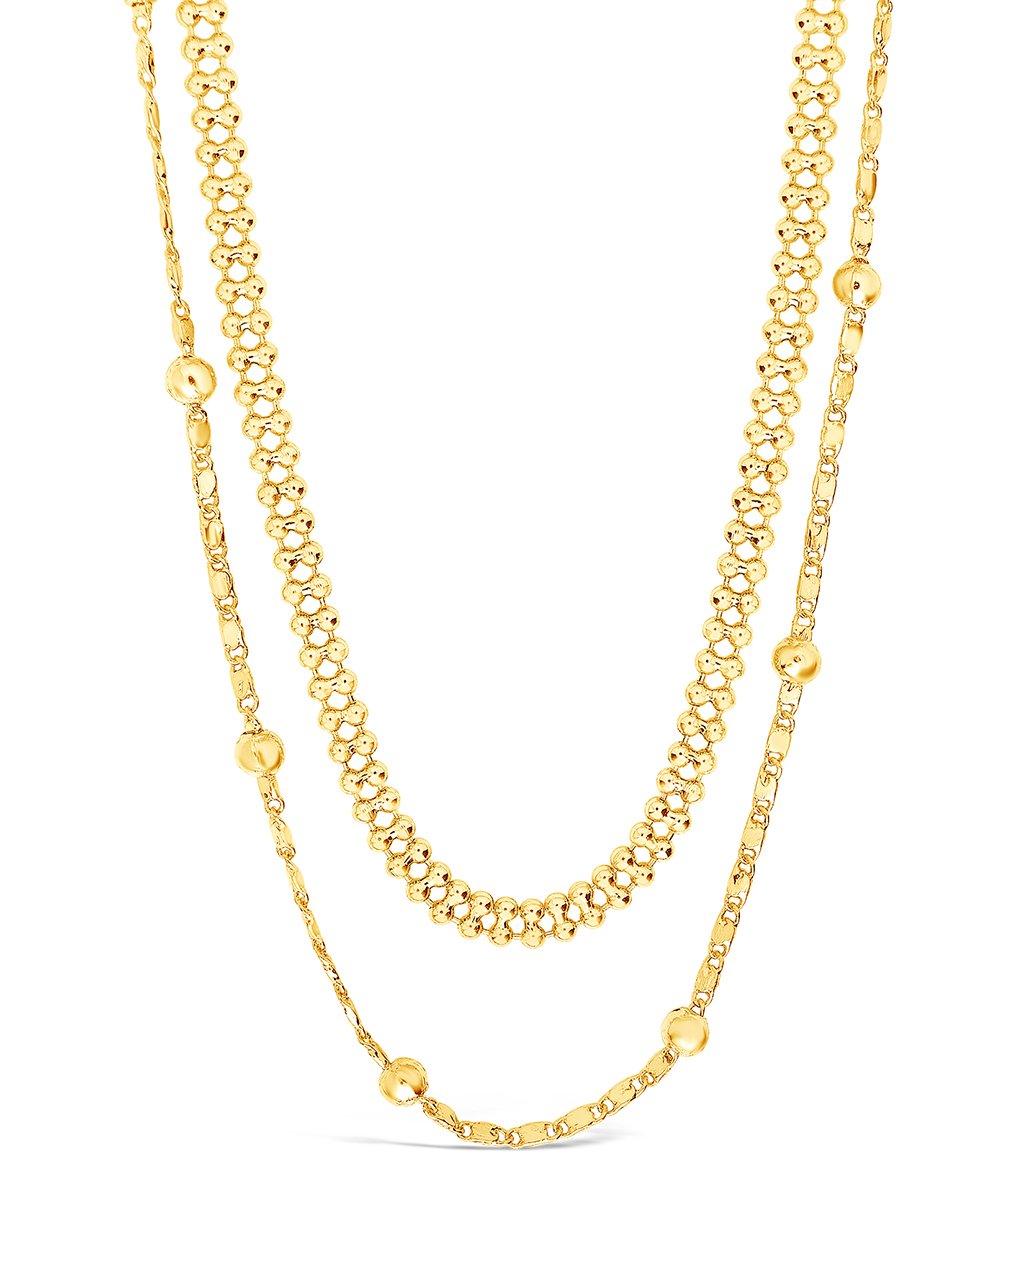 Layered Beaded Chain Necklace Necklace Sterling Forever Gold 